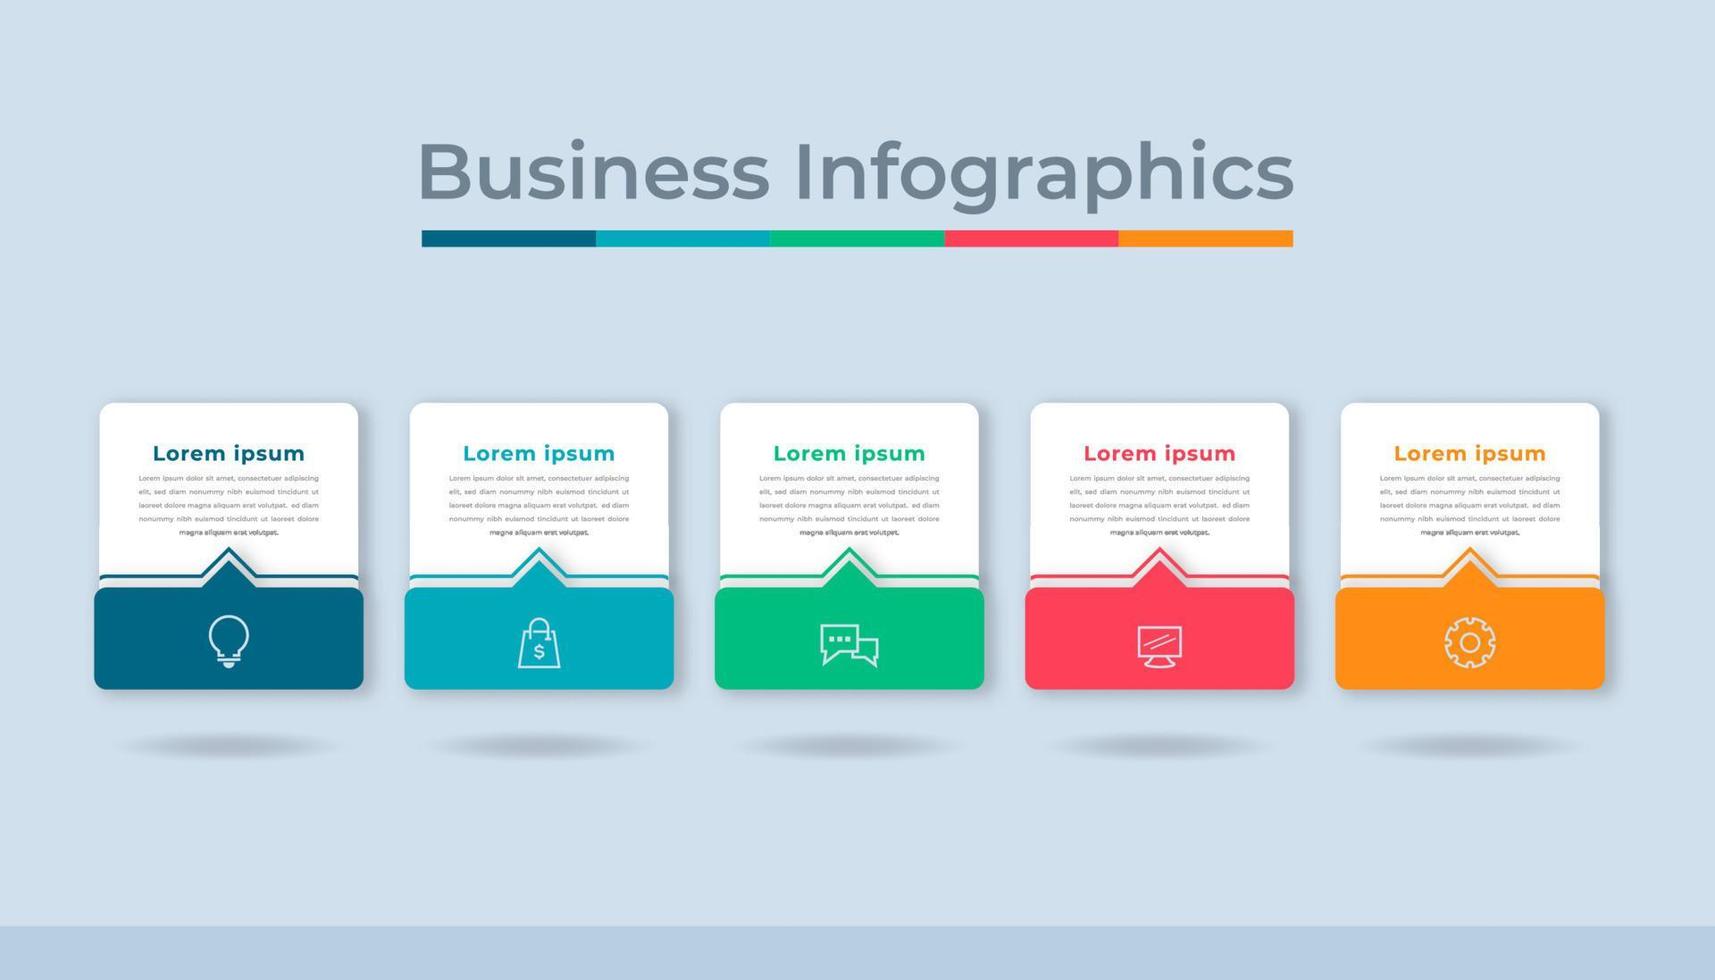 Timeline Infographics Business Data Visualization Process Chart. Abstract Diagram Graph with Steps, Options vector